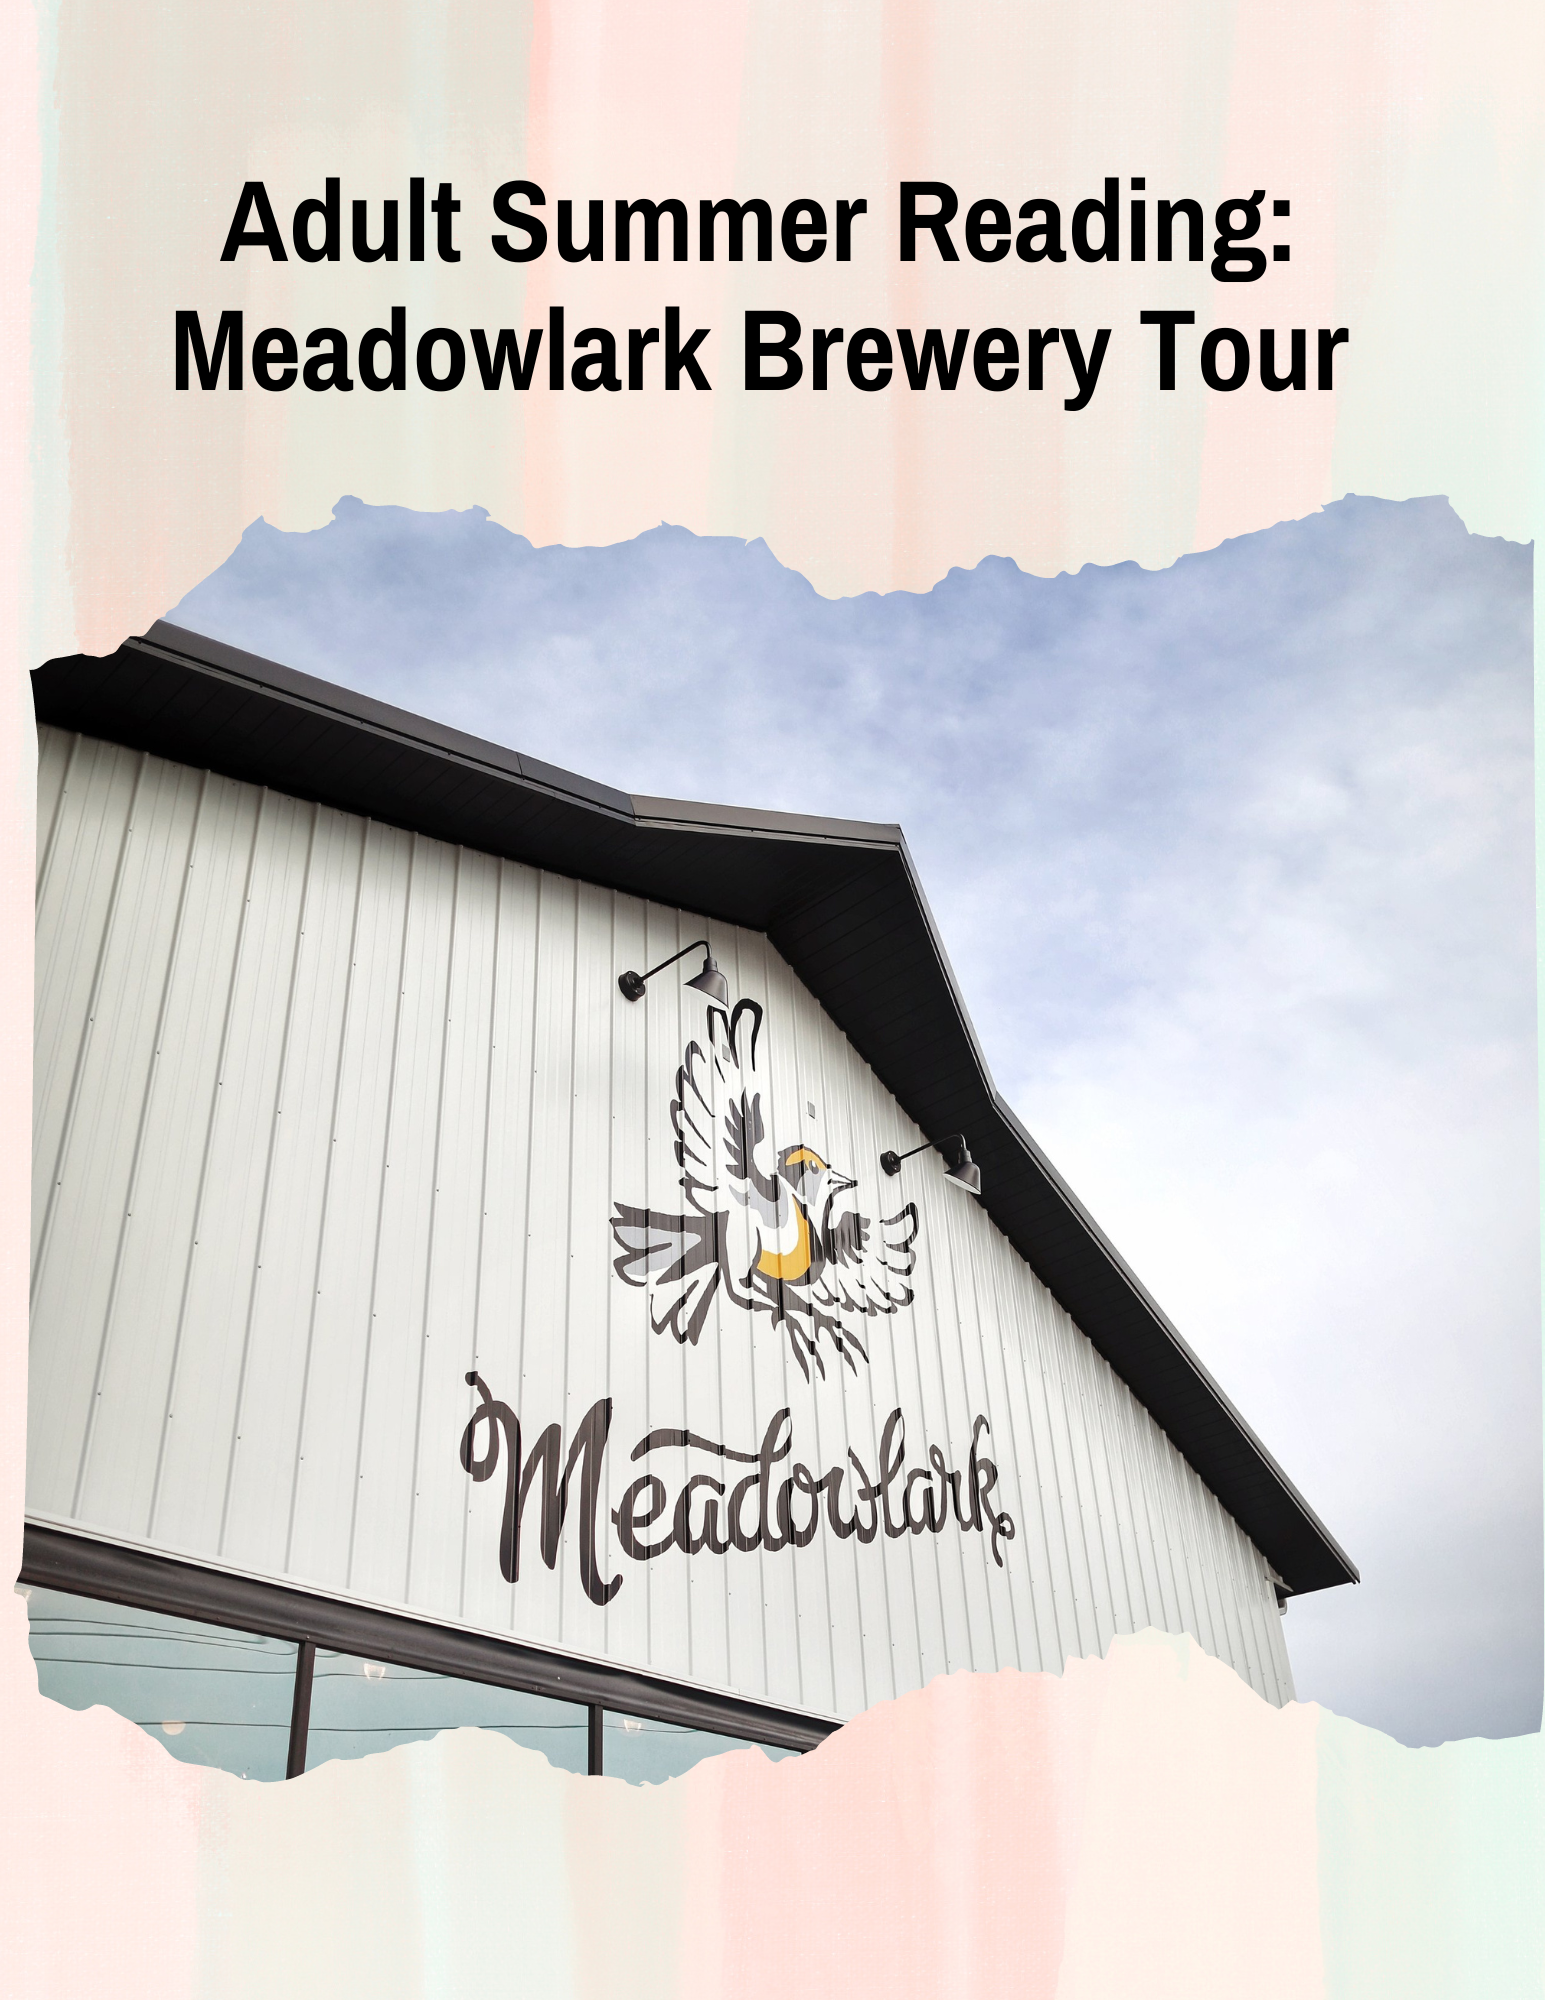 Flyer promoting a tour of the Meadowlark Brewery